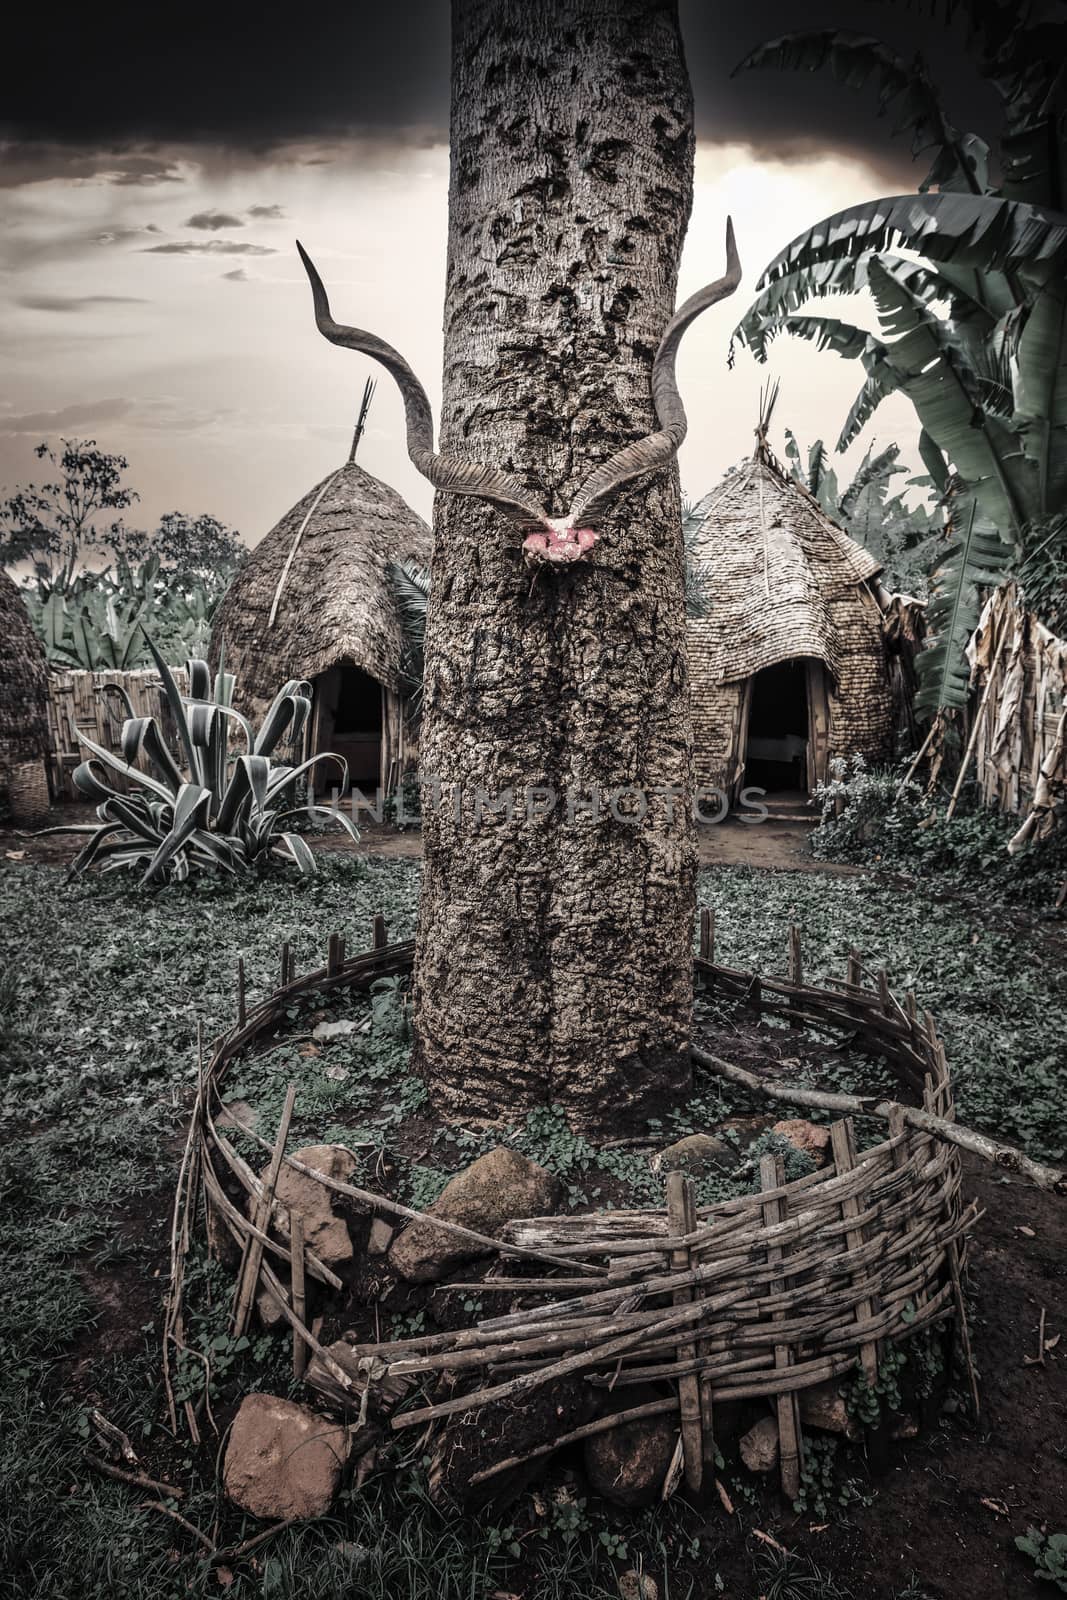 Totem in traditional elephant-shaped huts made of wood and straws in Dorze Village, Ethiopia.